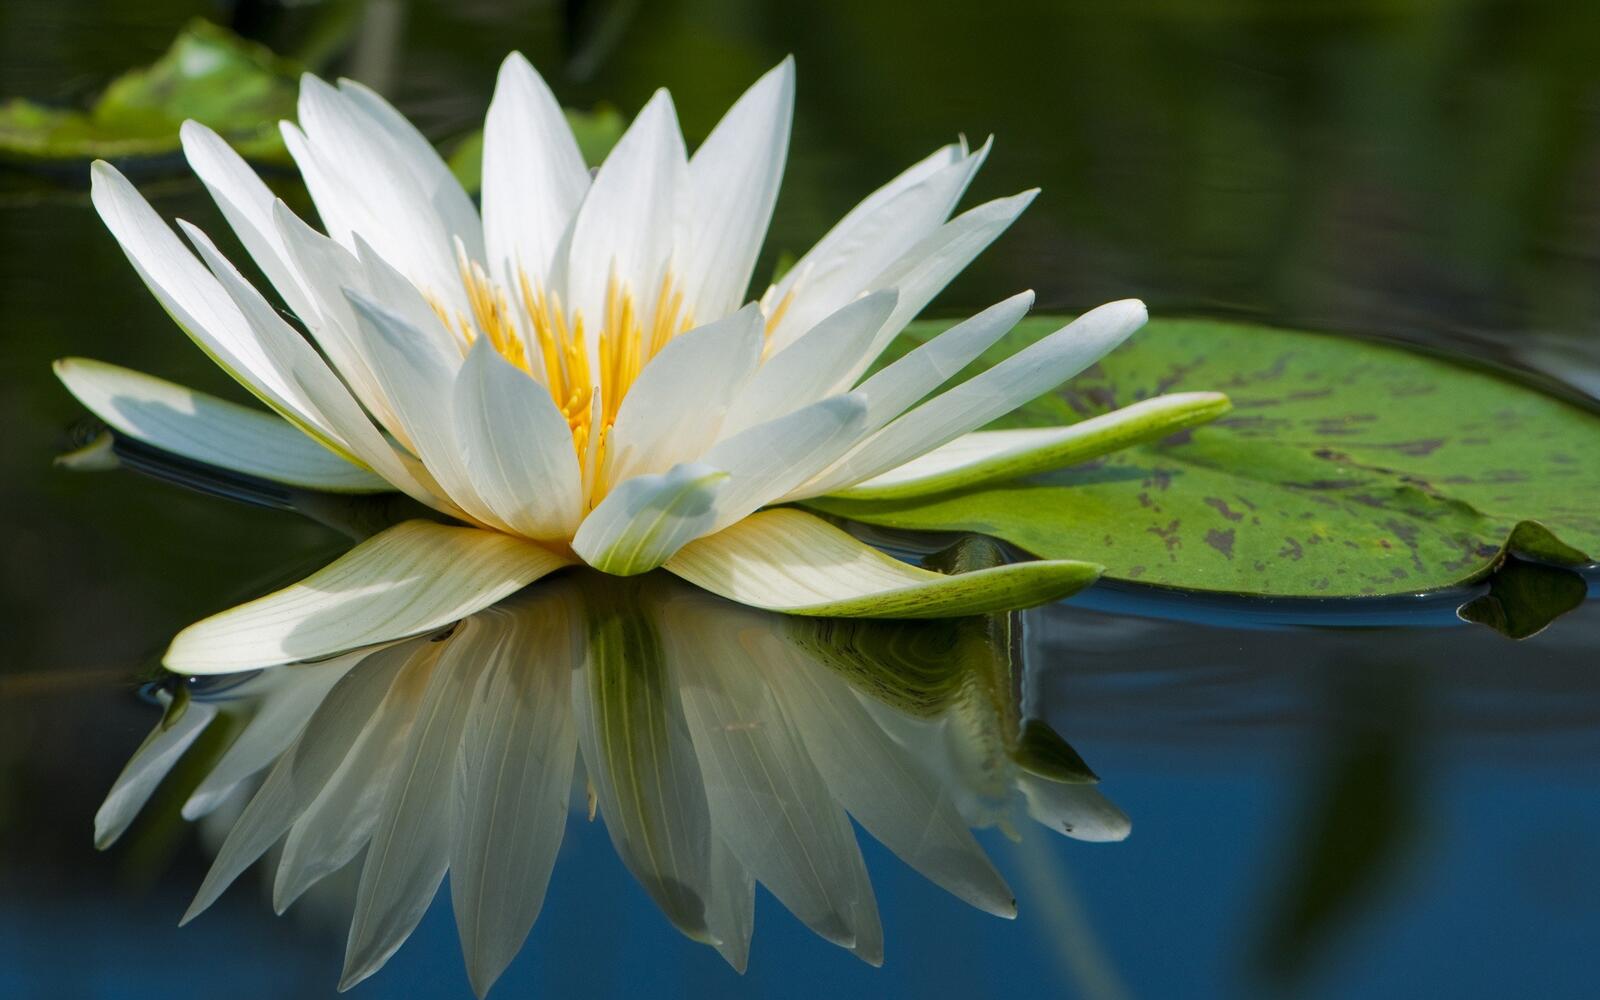 Wallpapers nature water lilies on the desktop